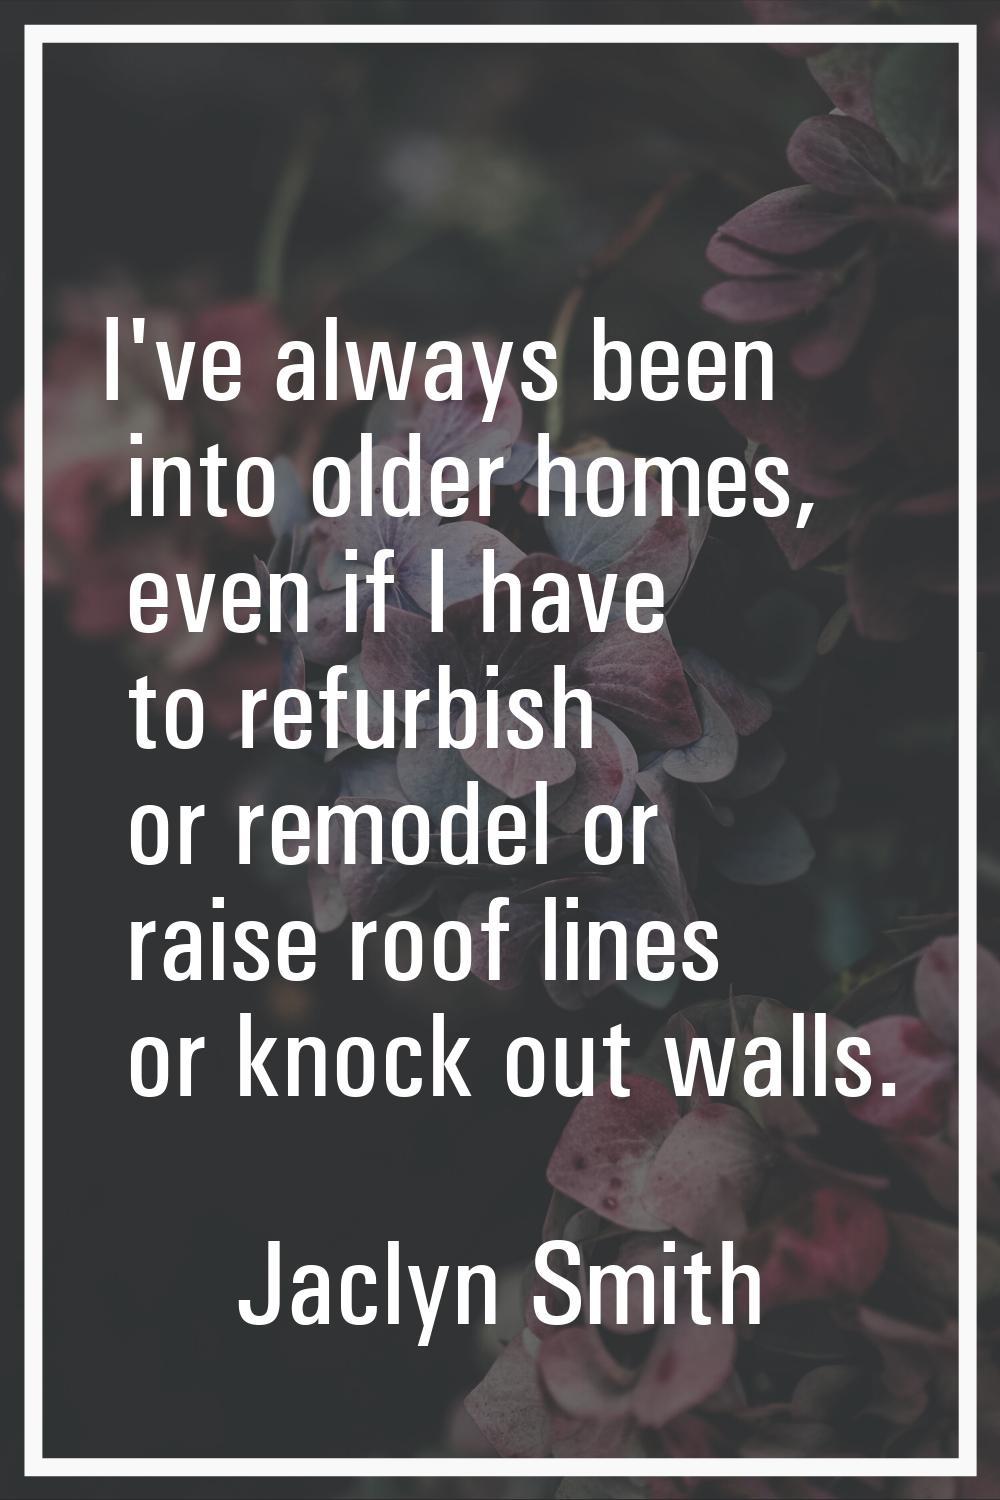 I've always been into older homes, even if I have to refurbish or remodel or raise roof lines or kn